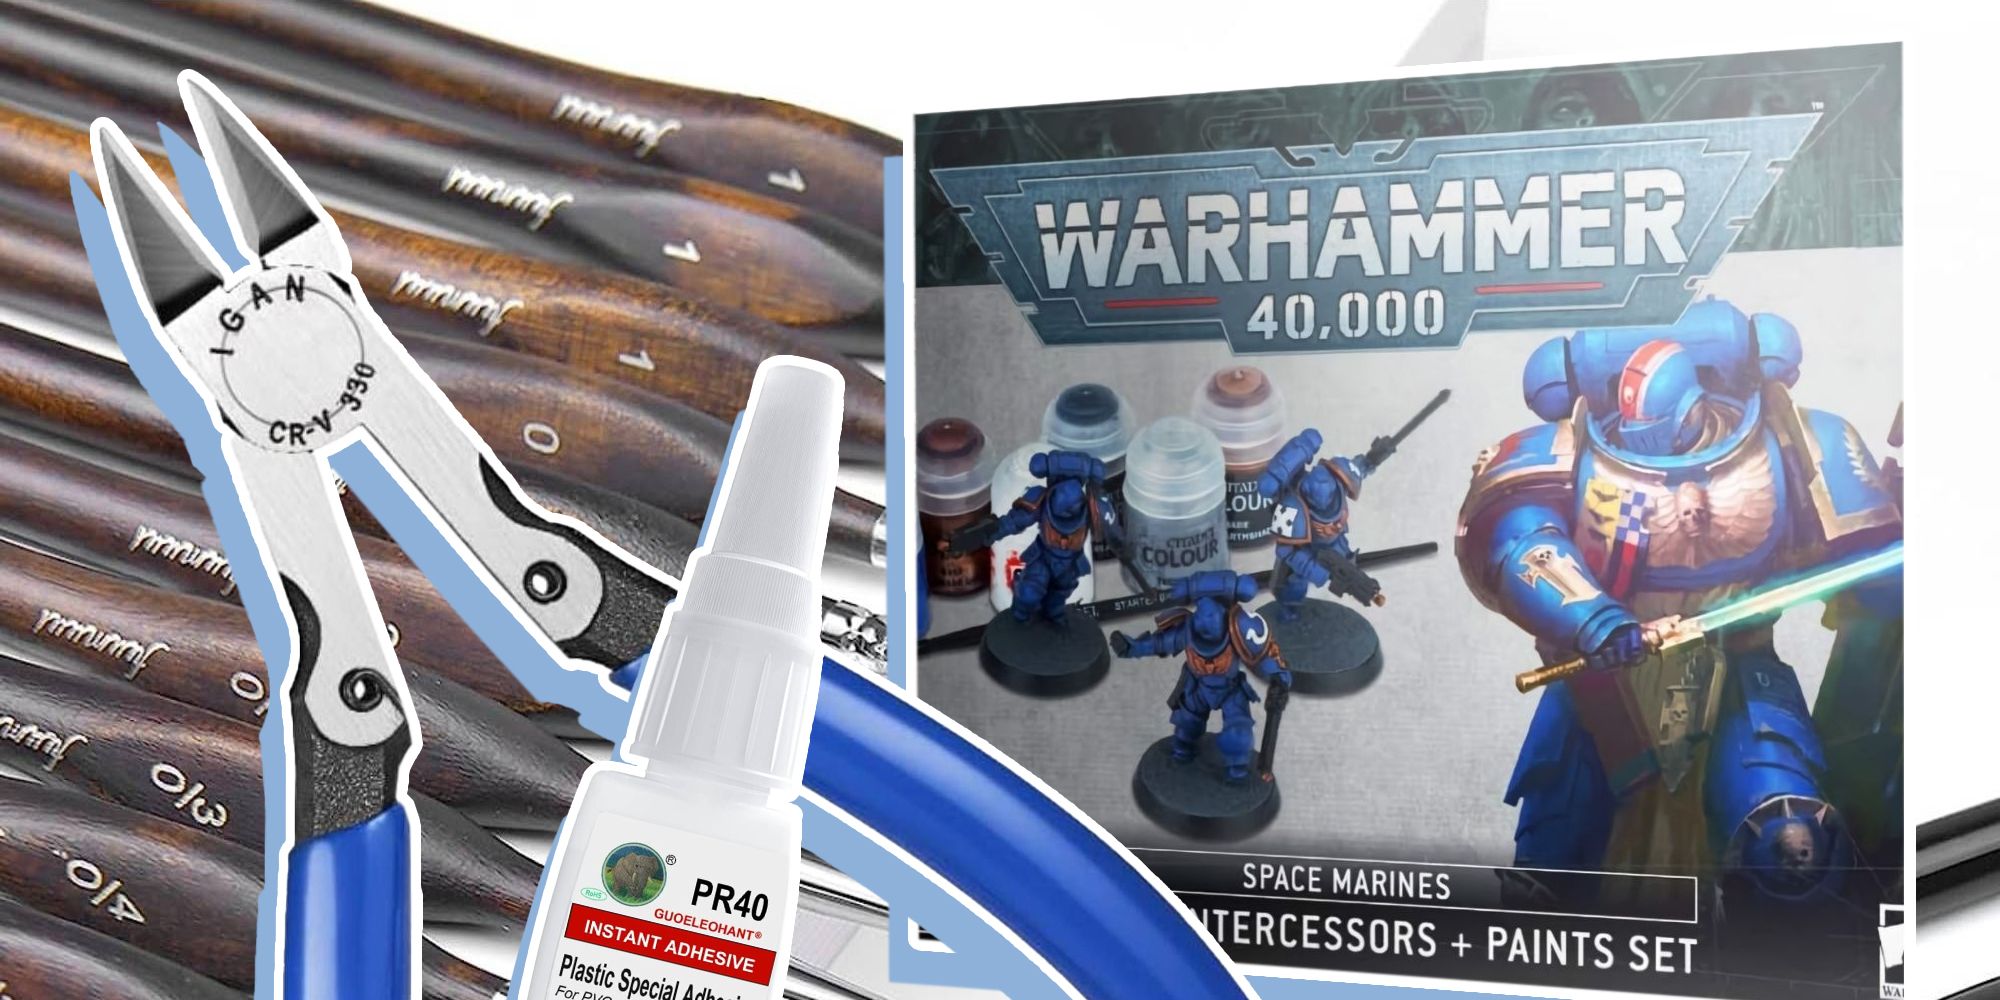 Warhammer 40k Accessories to buy to pain your sets with paintbrushes glue sets and more. 